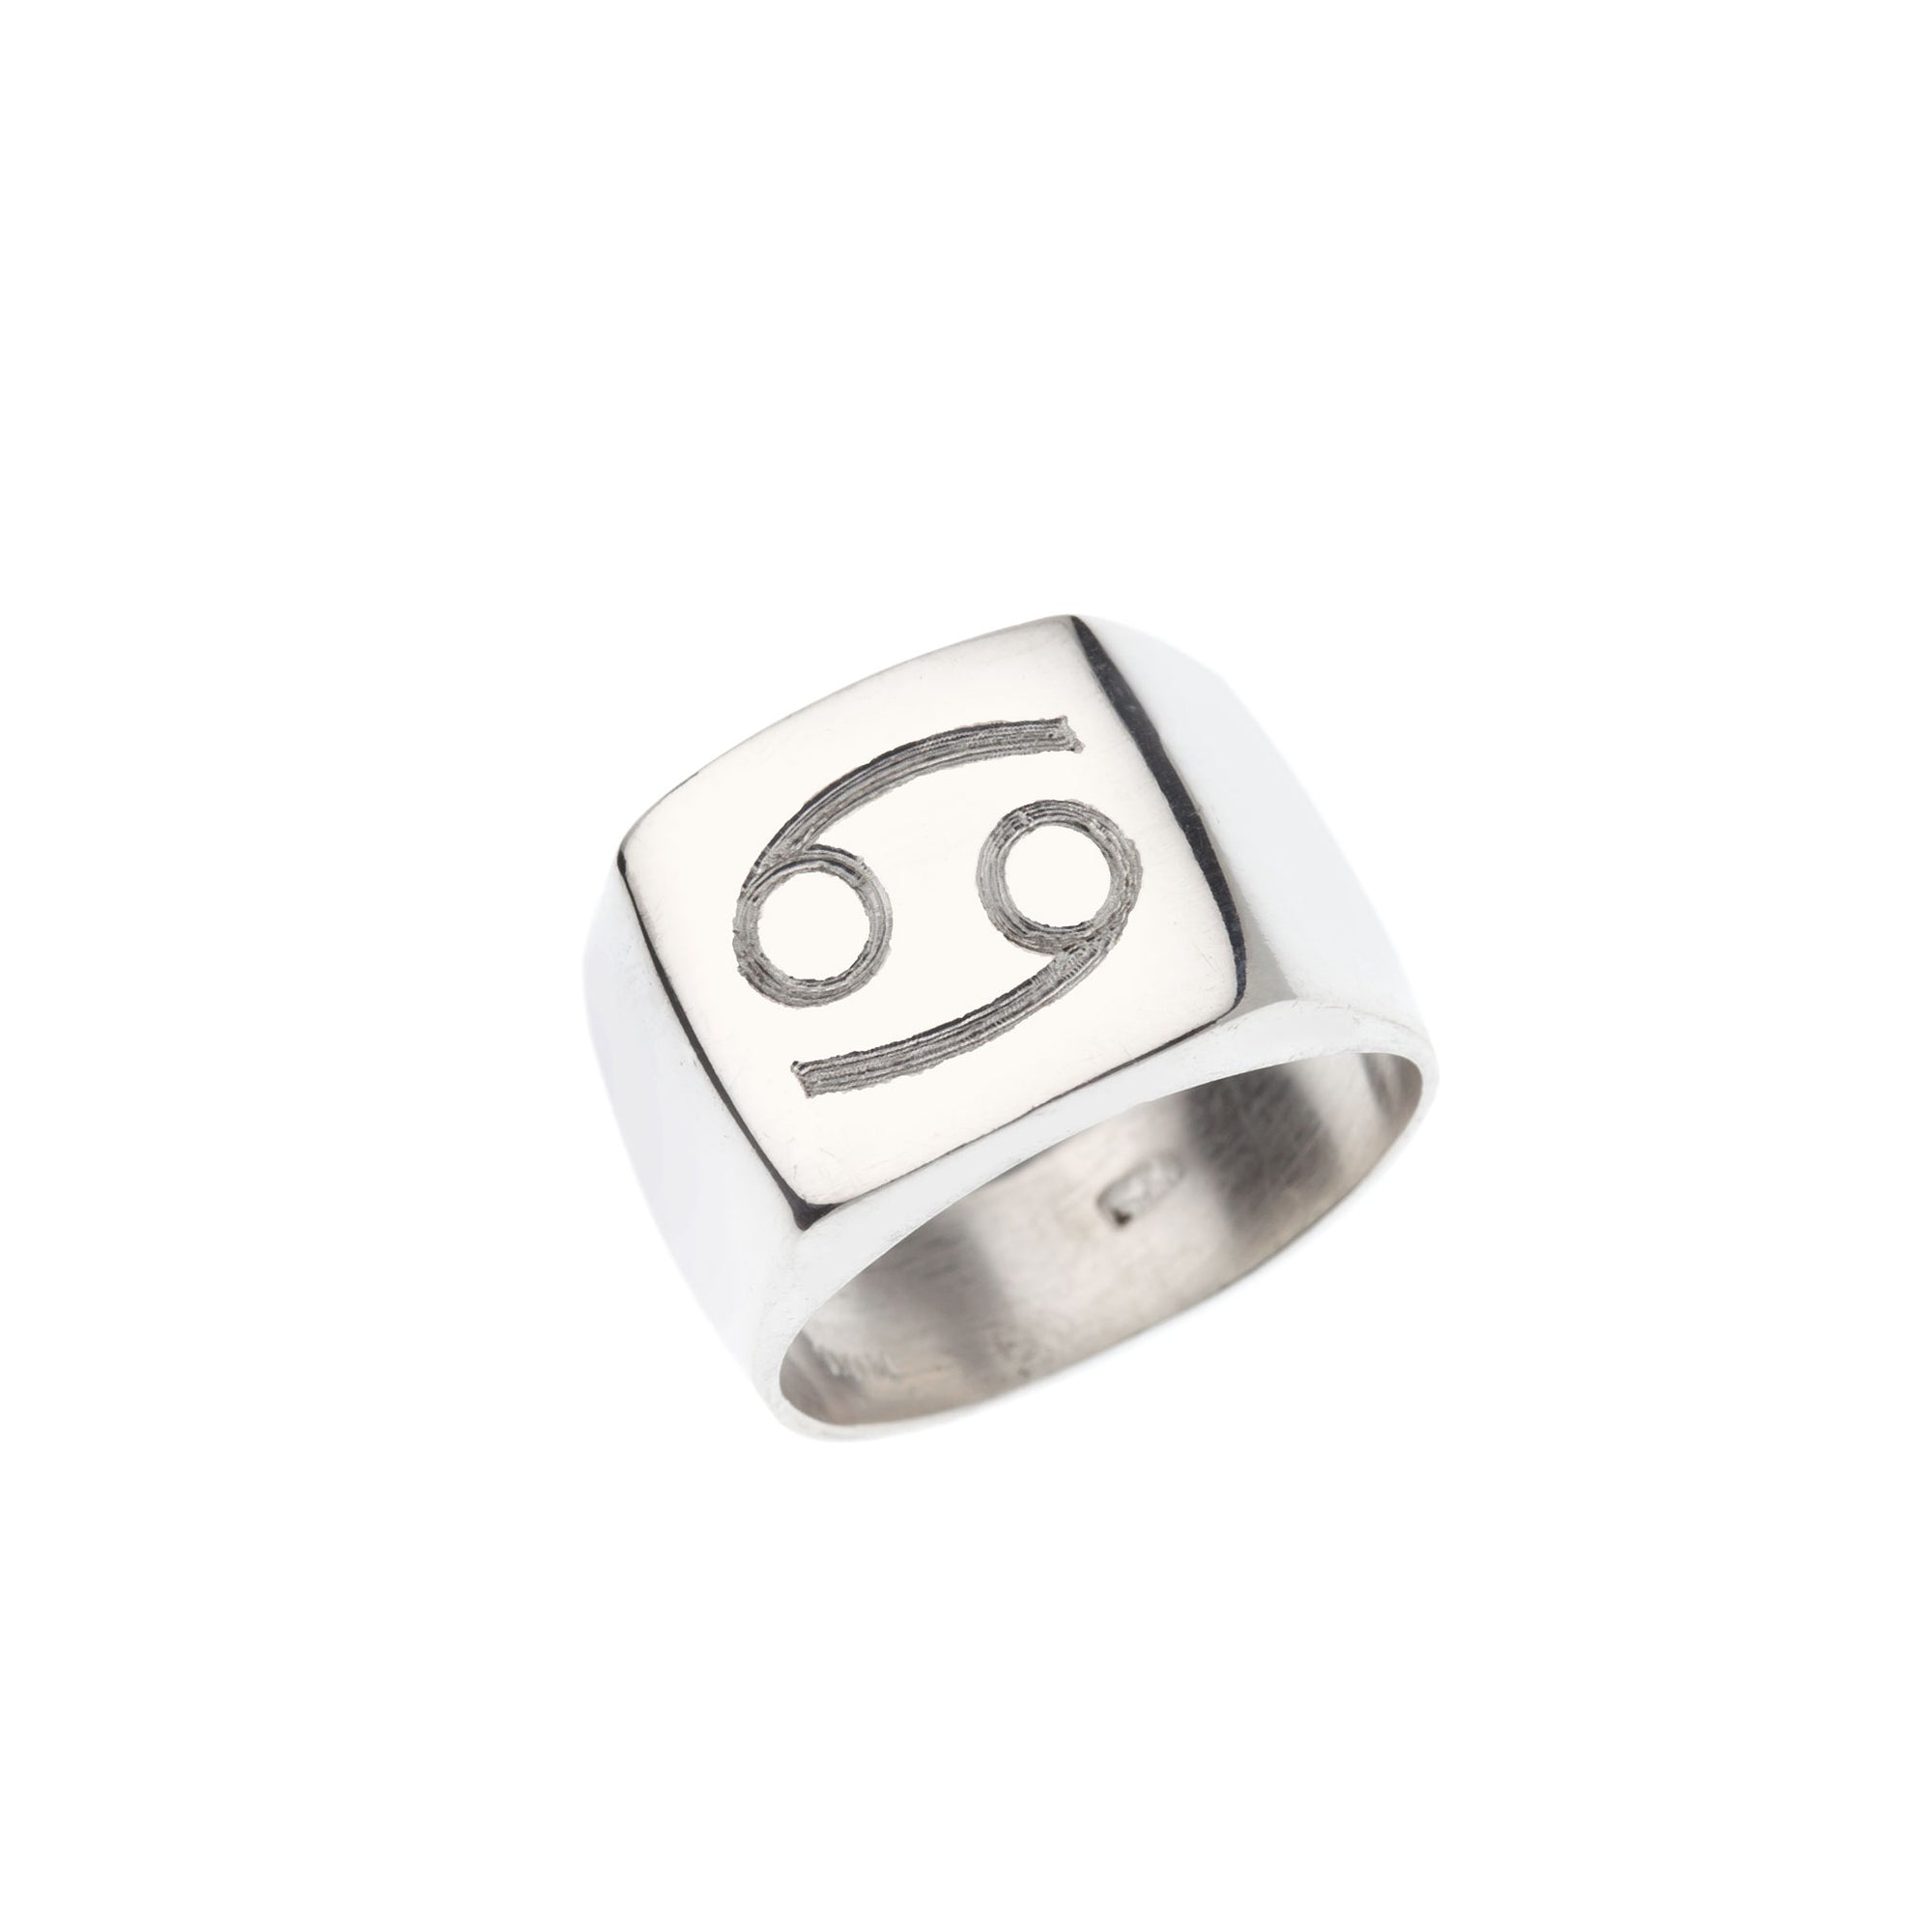 Square silver signet ring with engraved Cancer symbol.